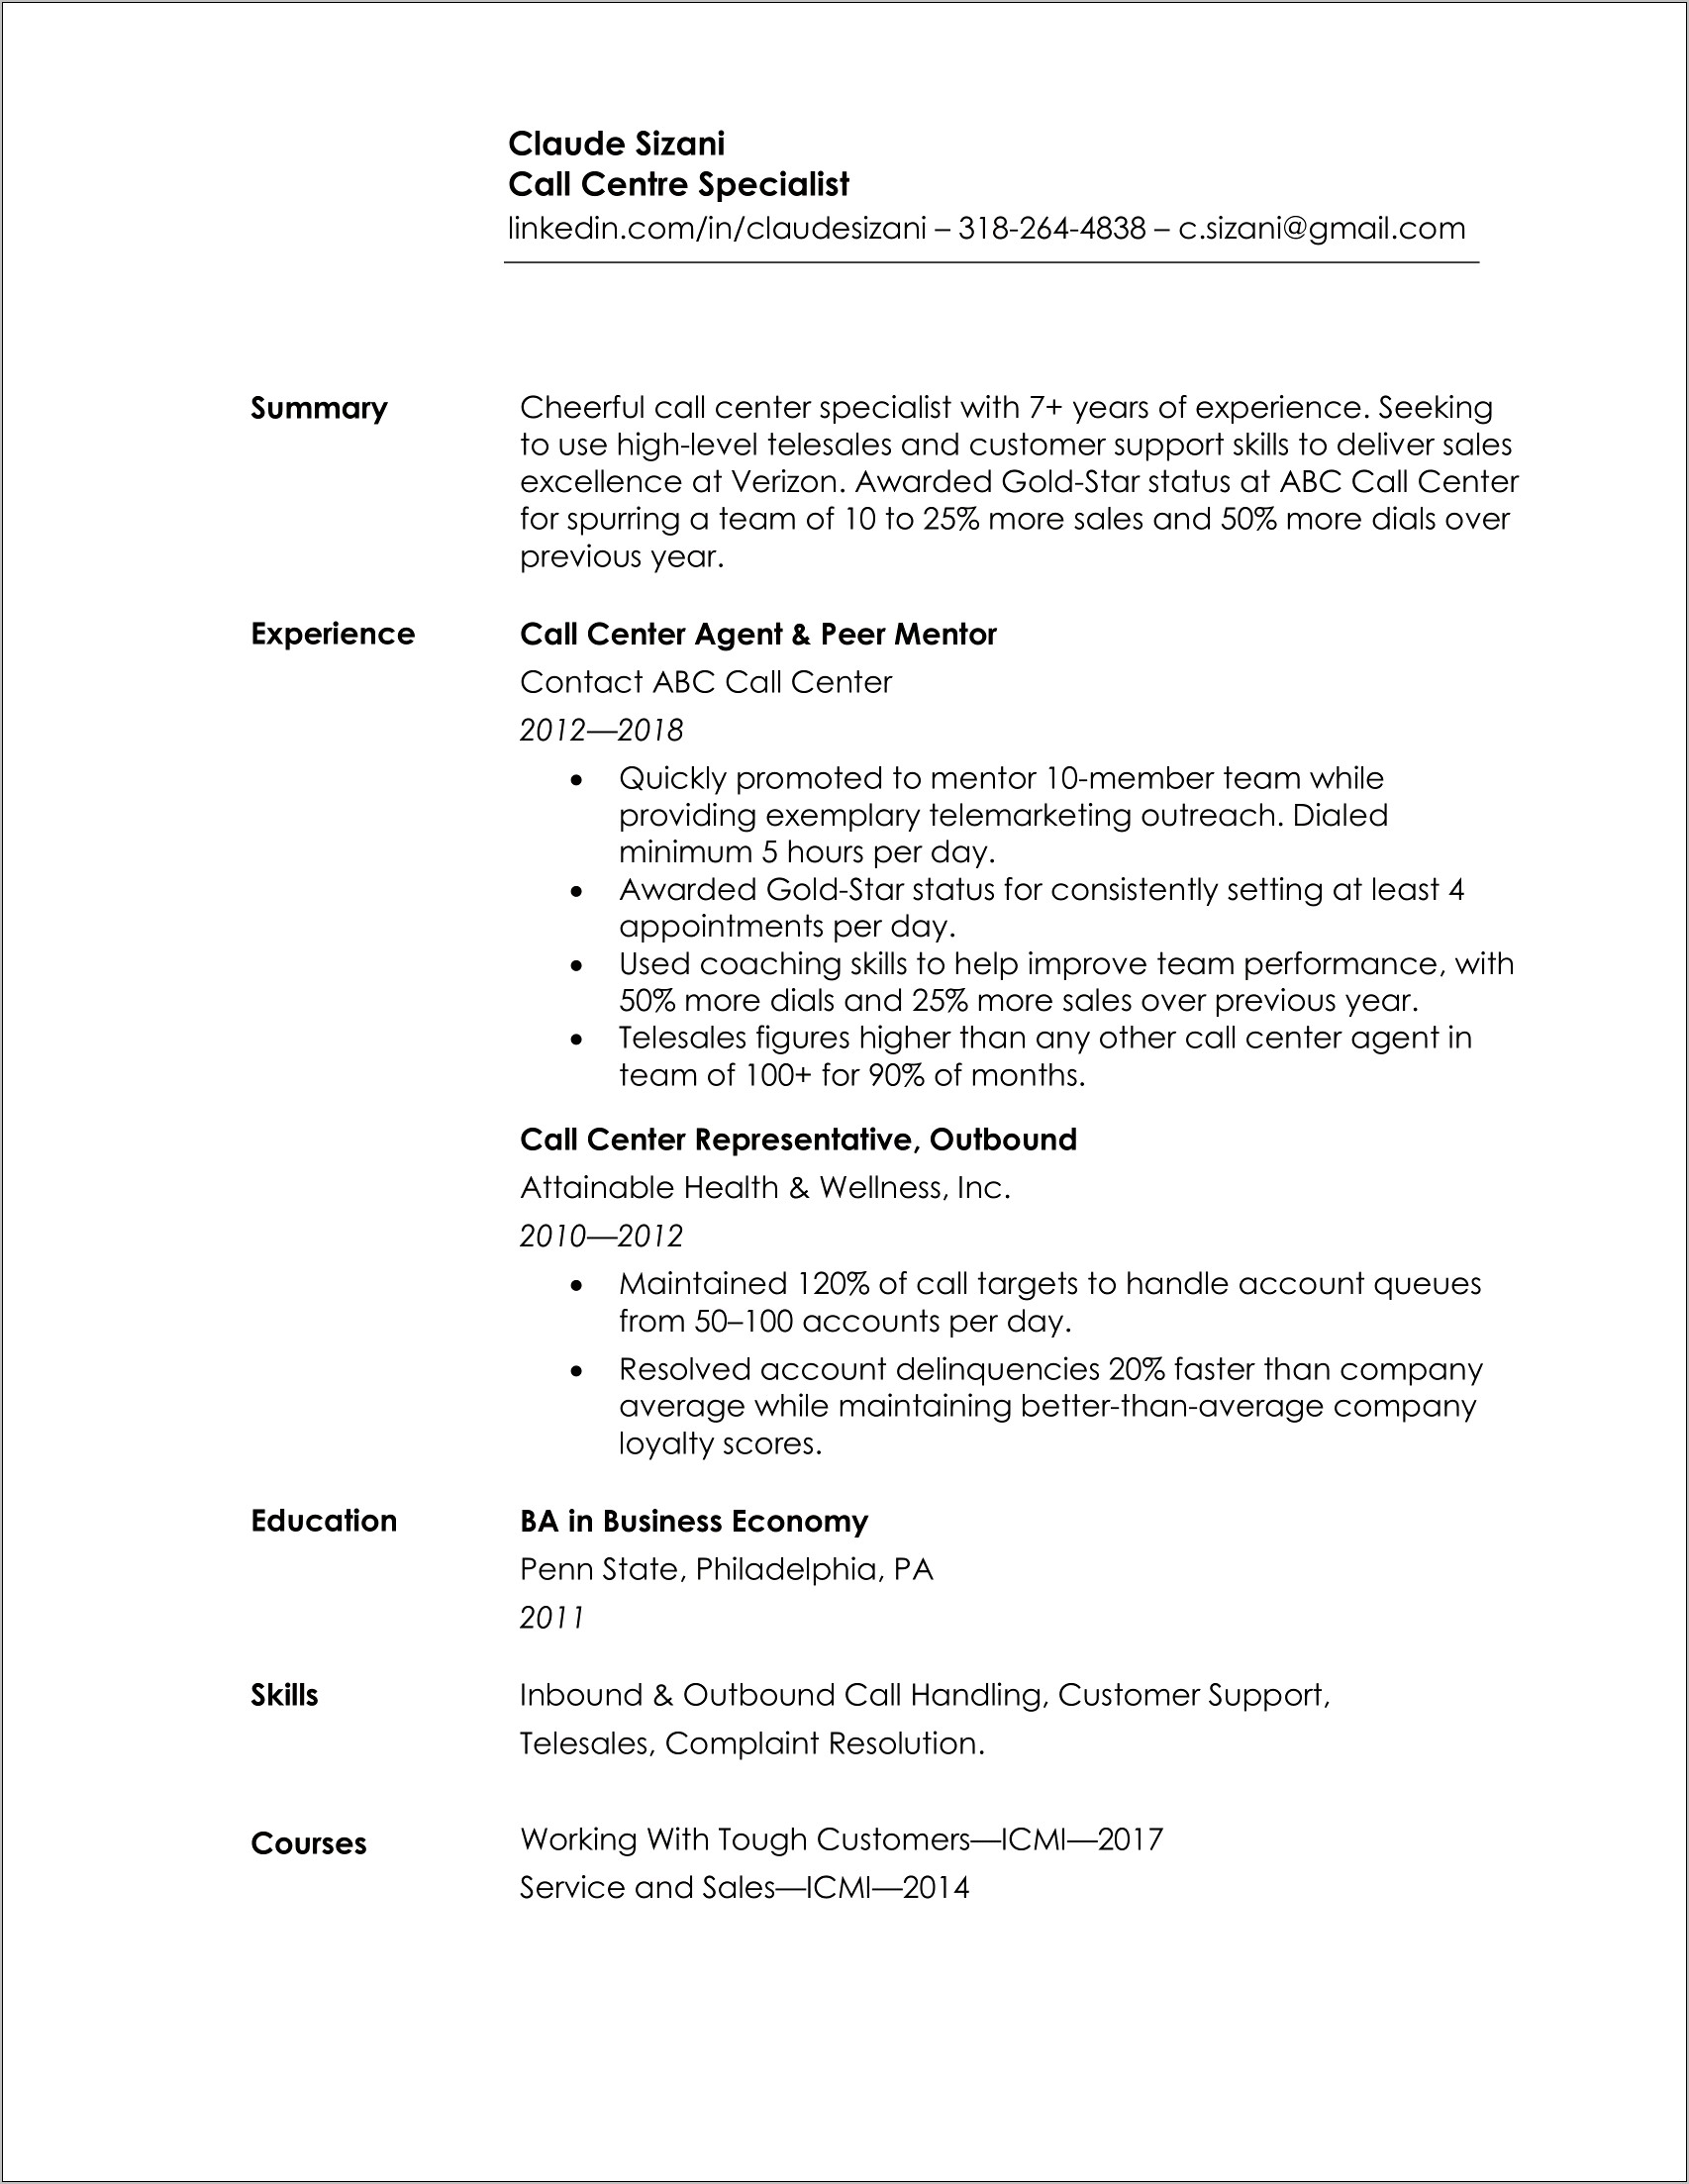 Resumes Examples For Workers Over 50